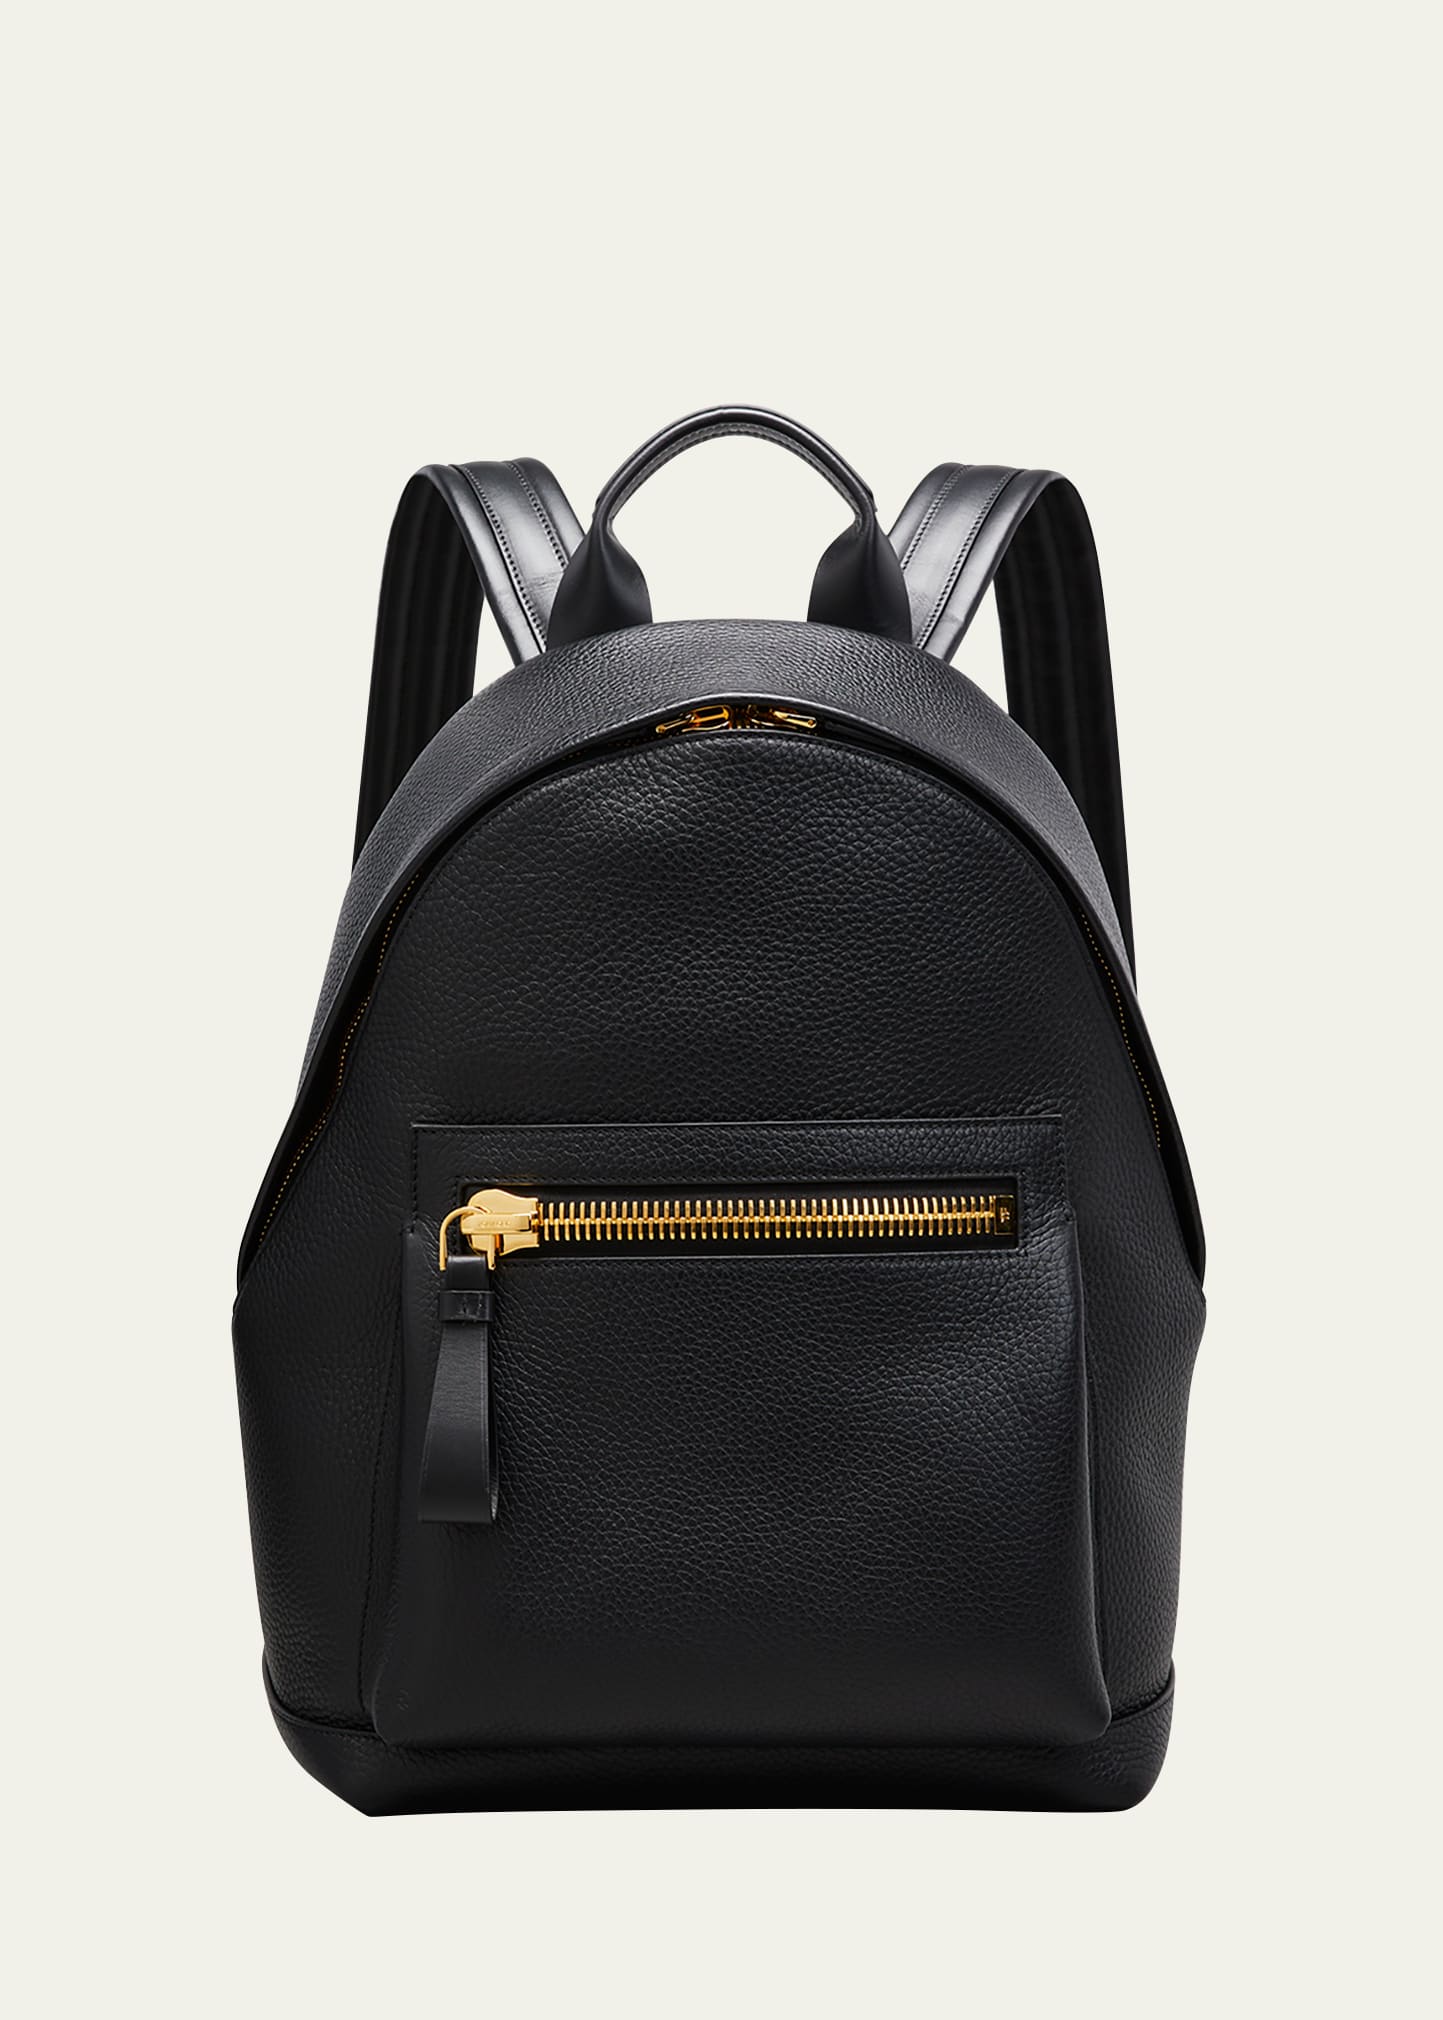 Tom Ford Buckley Pebble-grain Leather Backpack In Blue